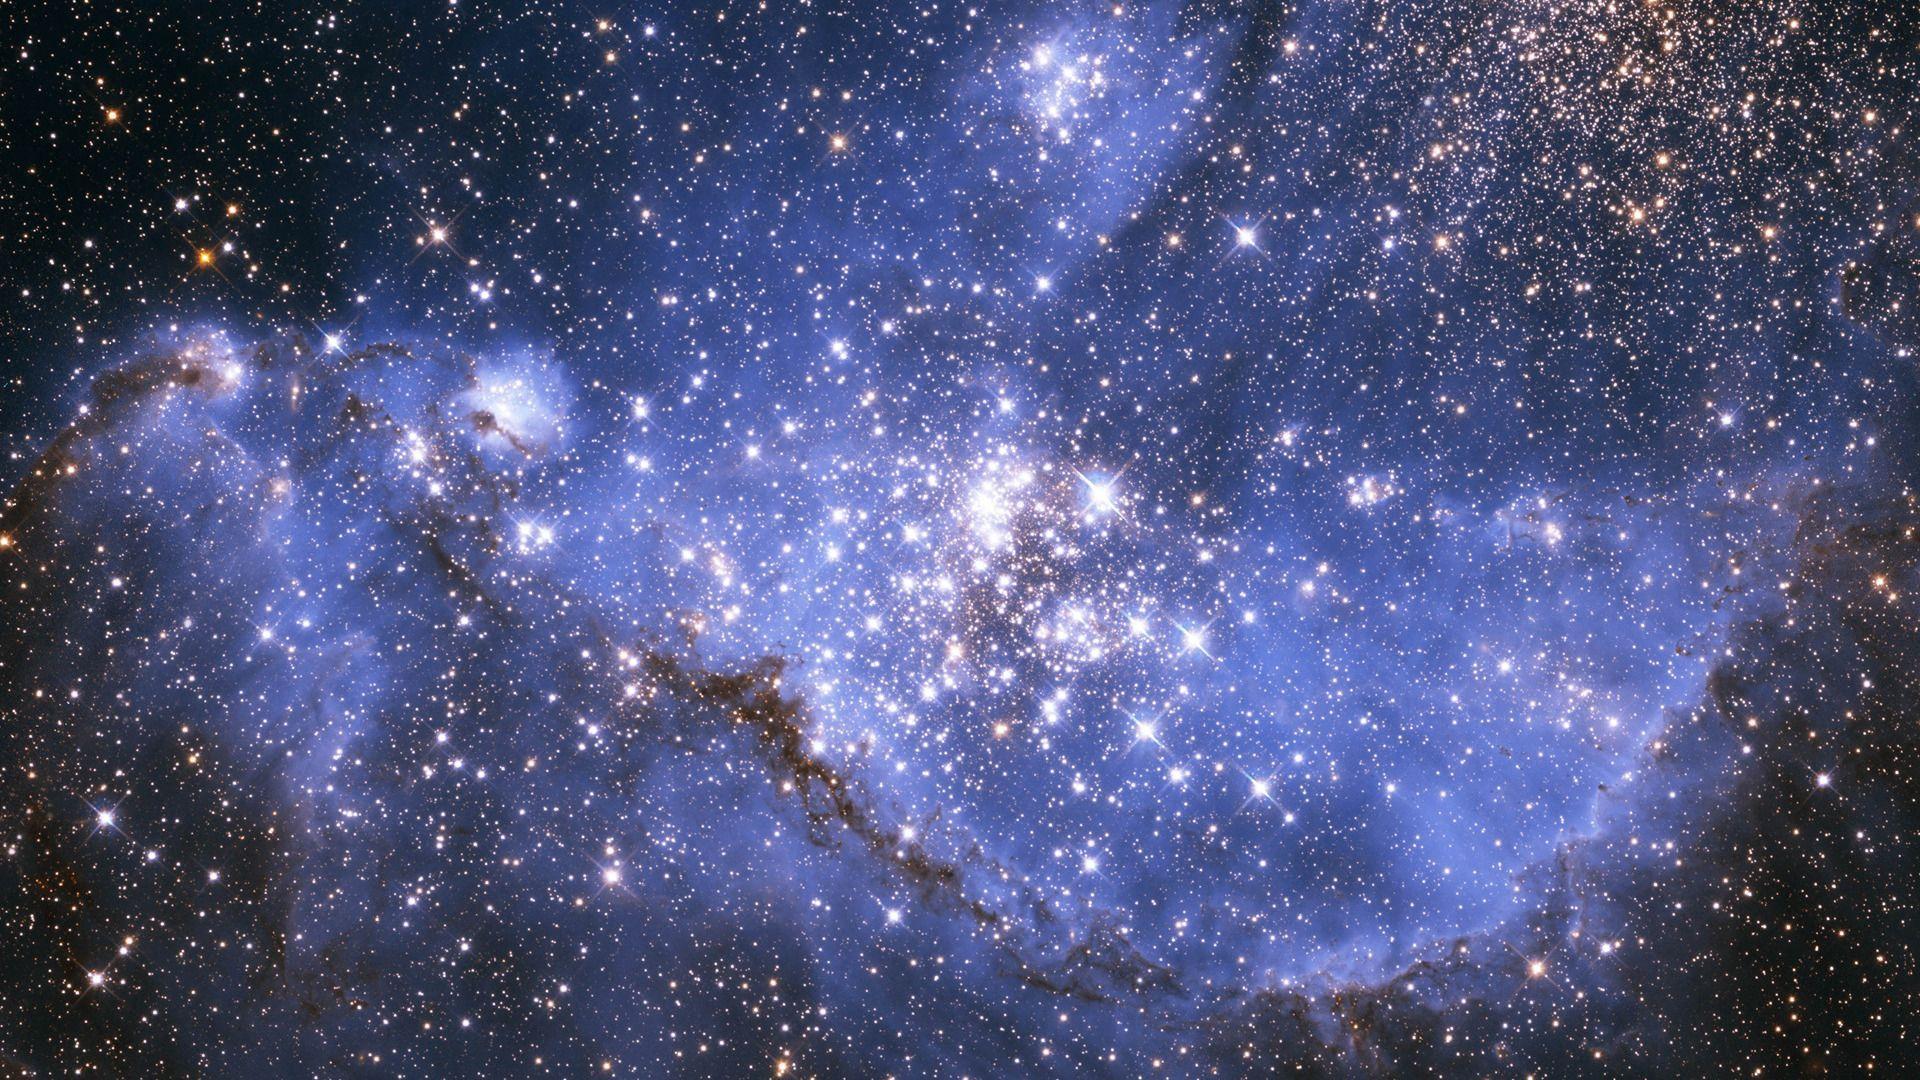 Stars In Space Backgrounds - Wallpaper Cave